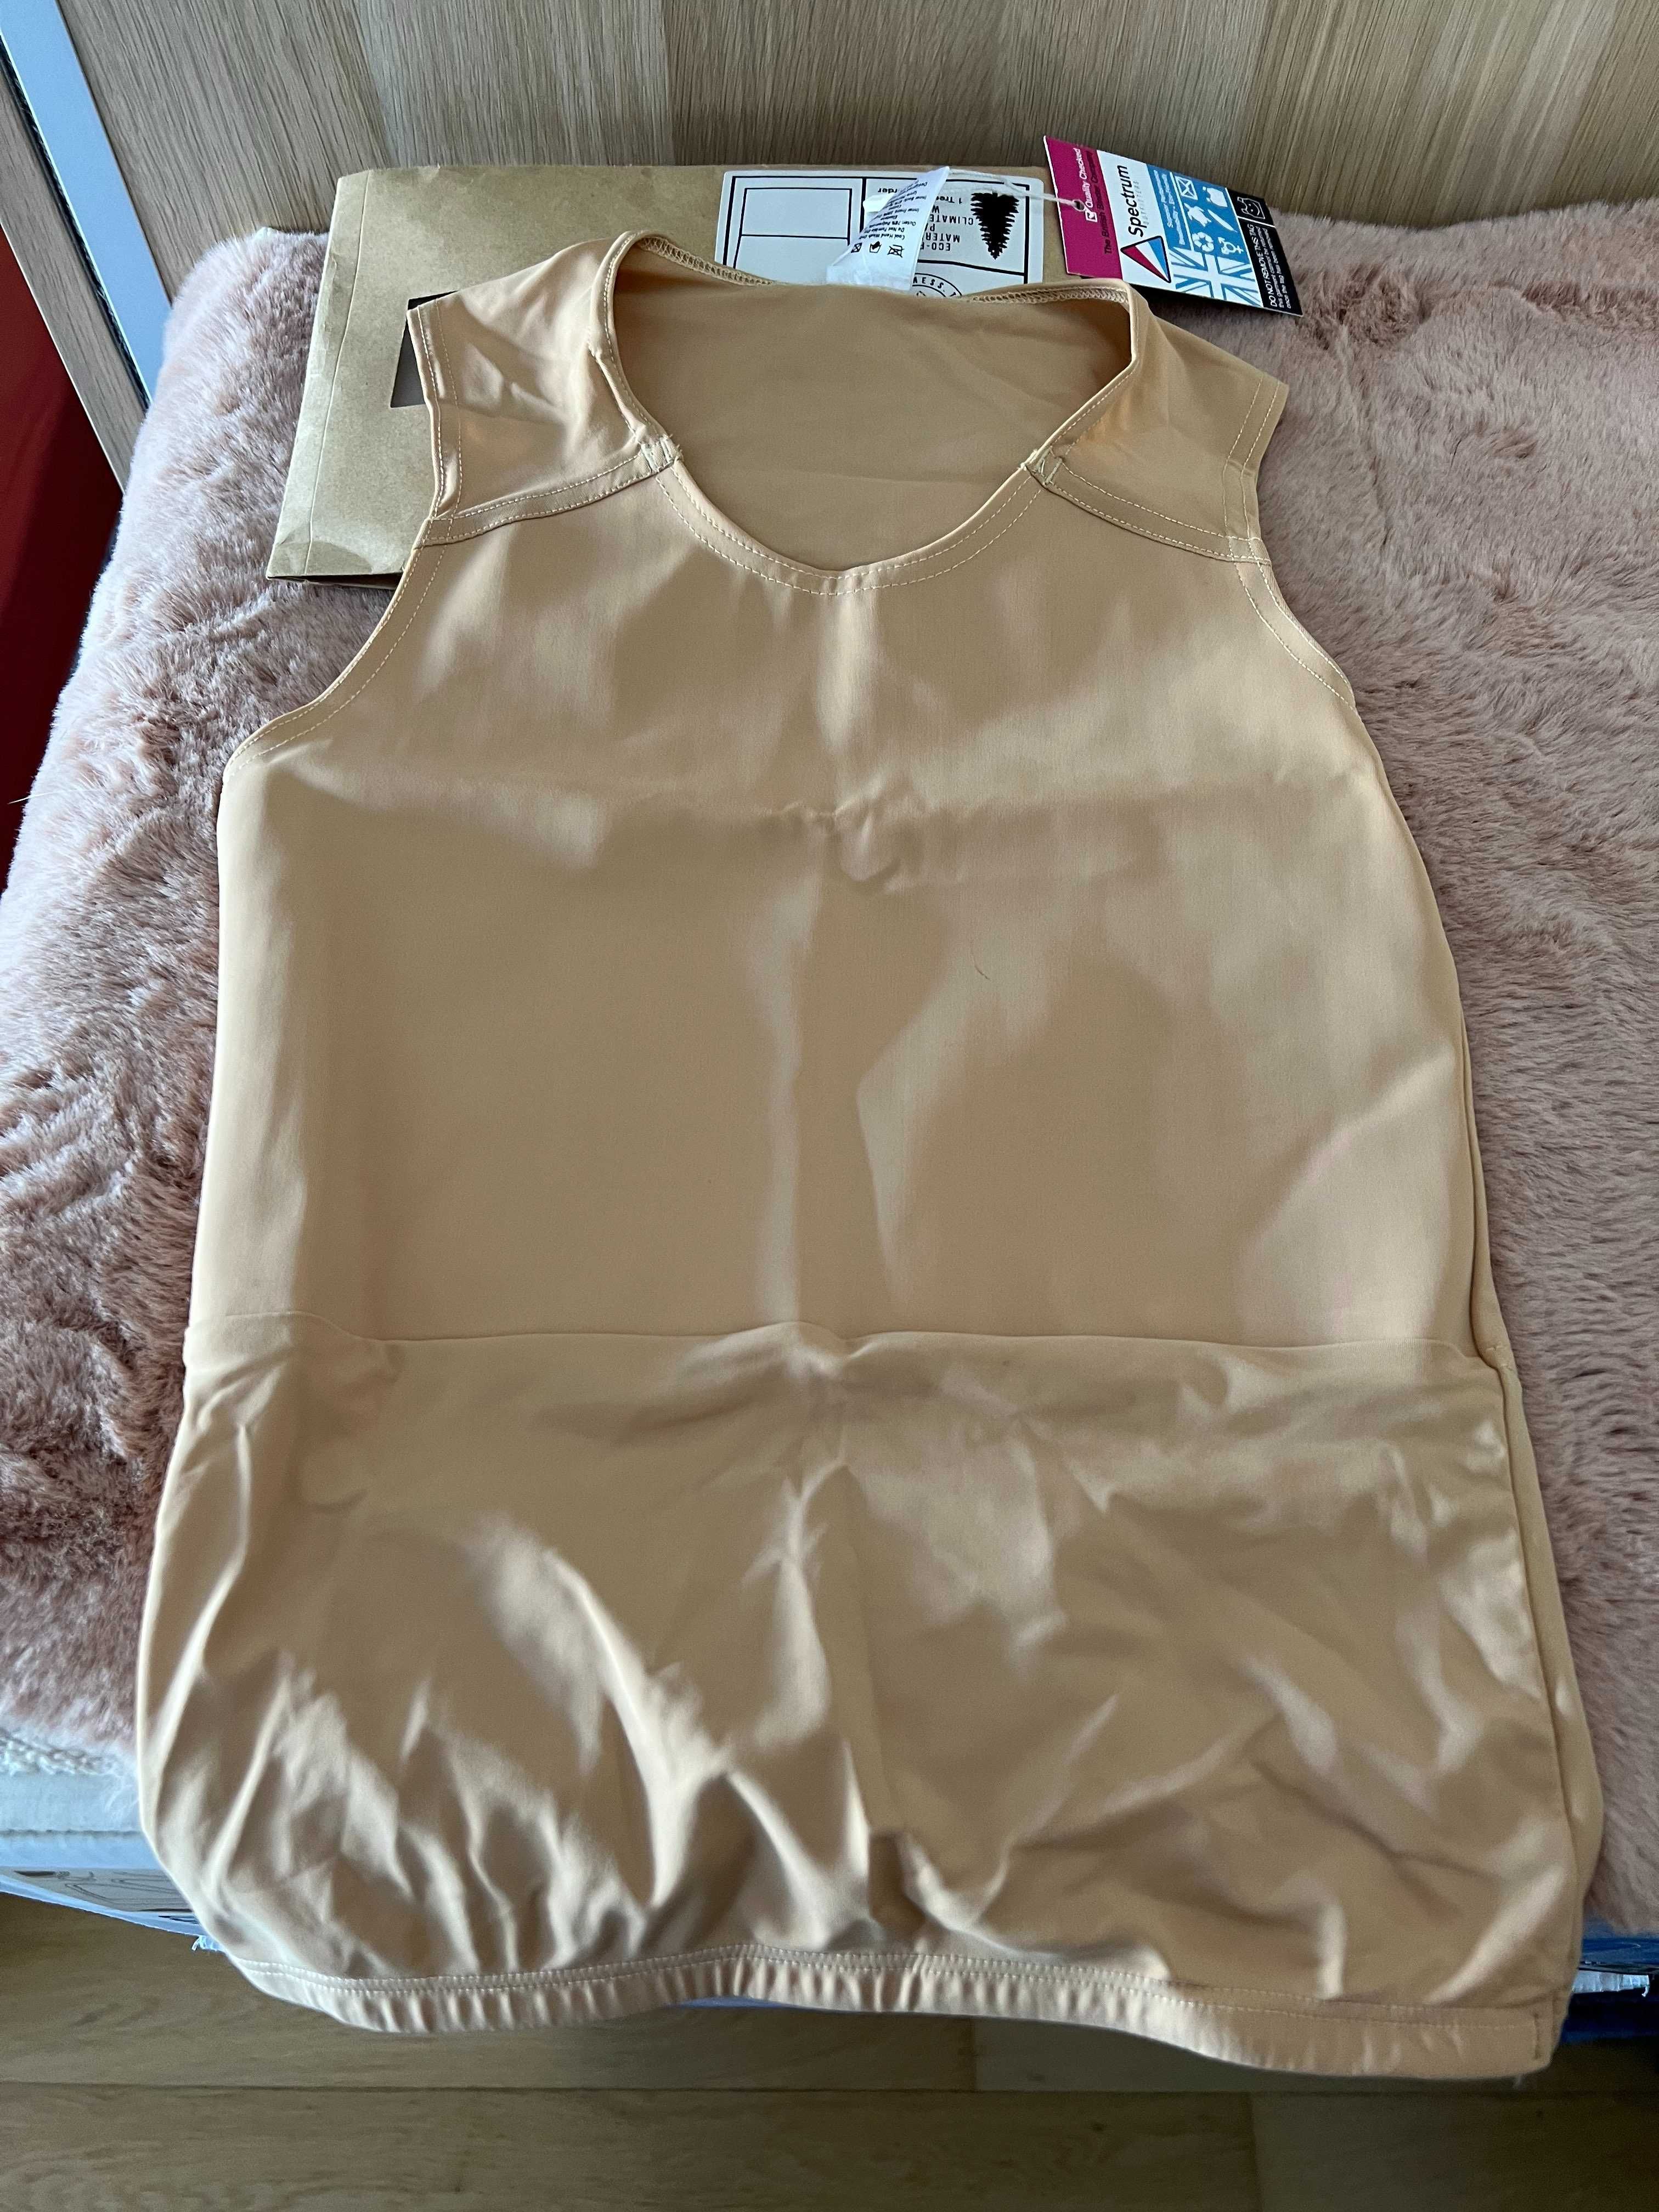 Chest binder Spectrum Outfitters Long Honey XS - FTM/Trans/Nonbinary